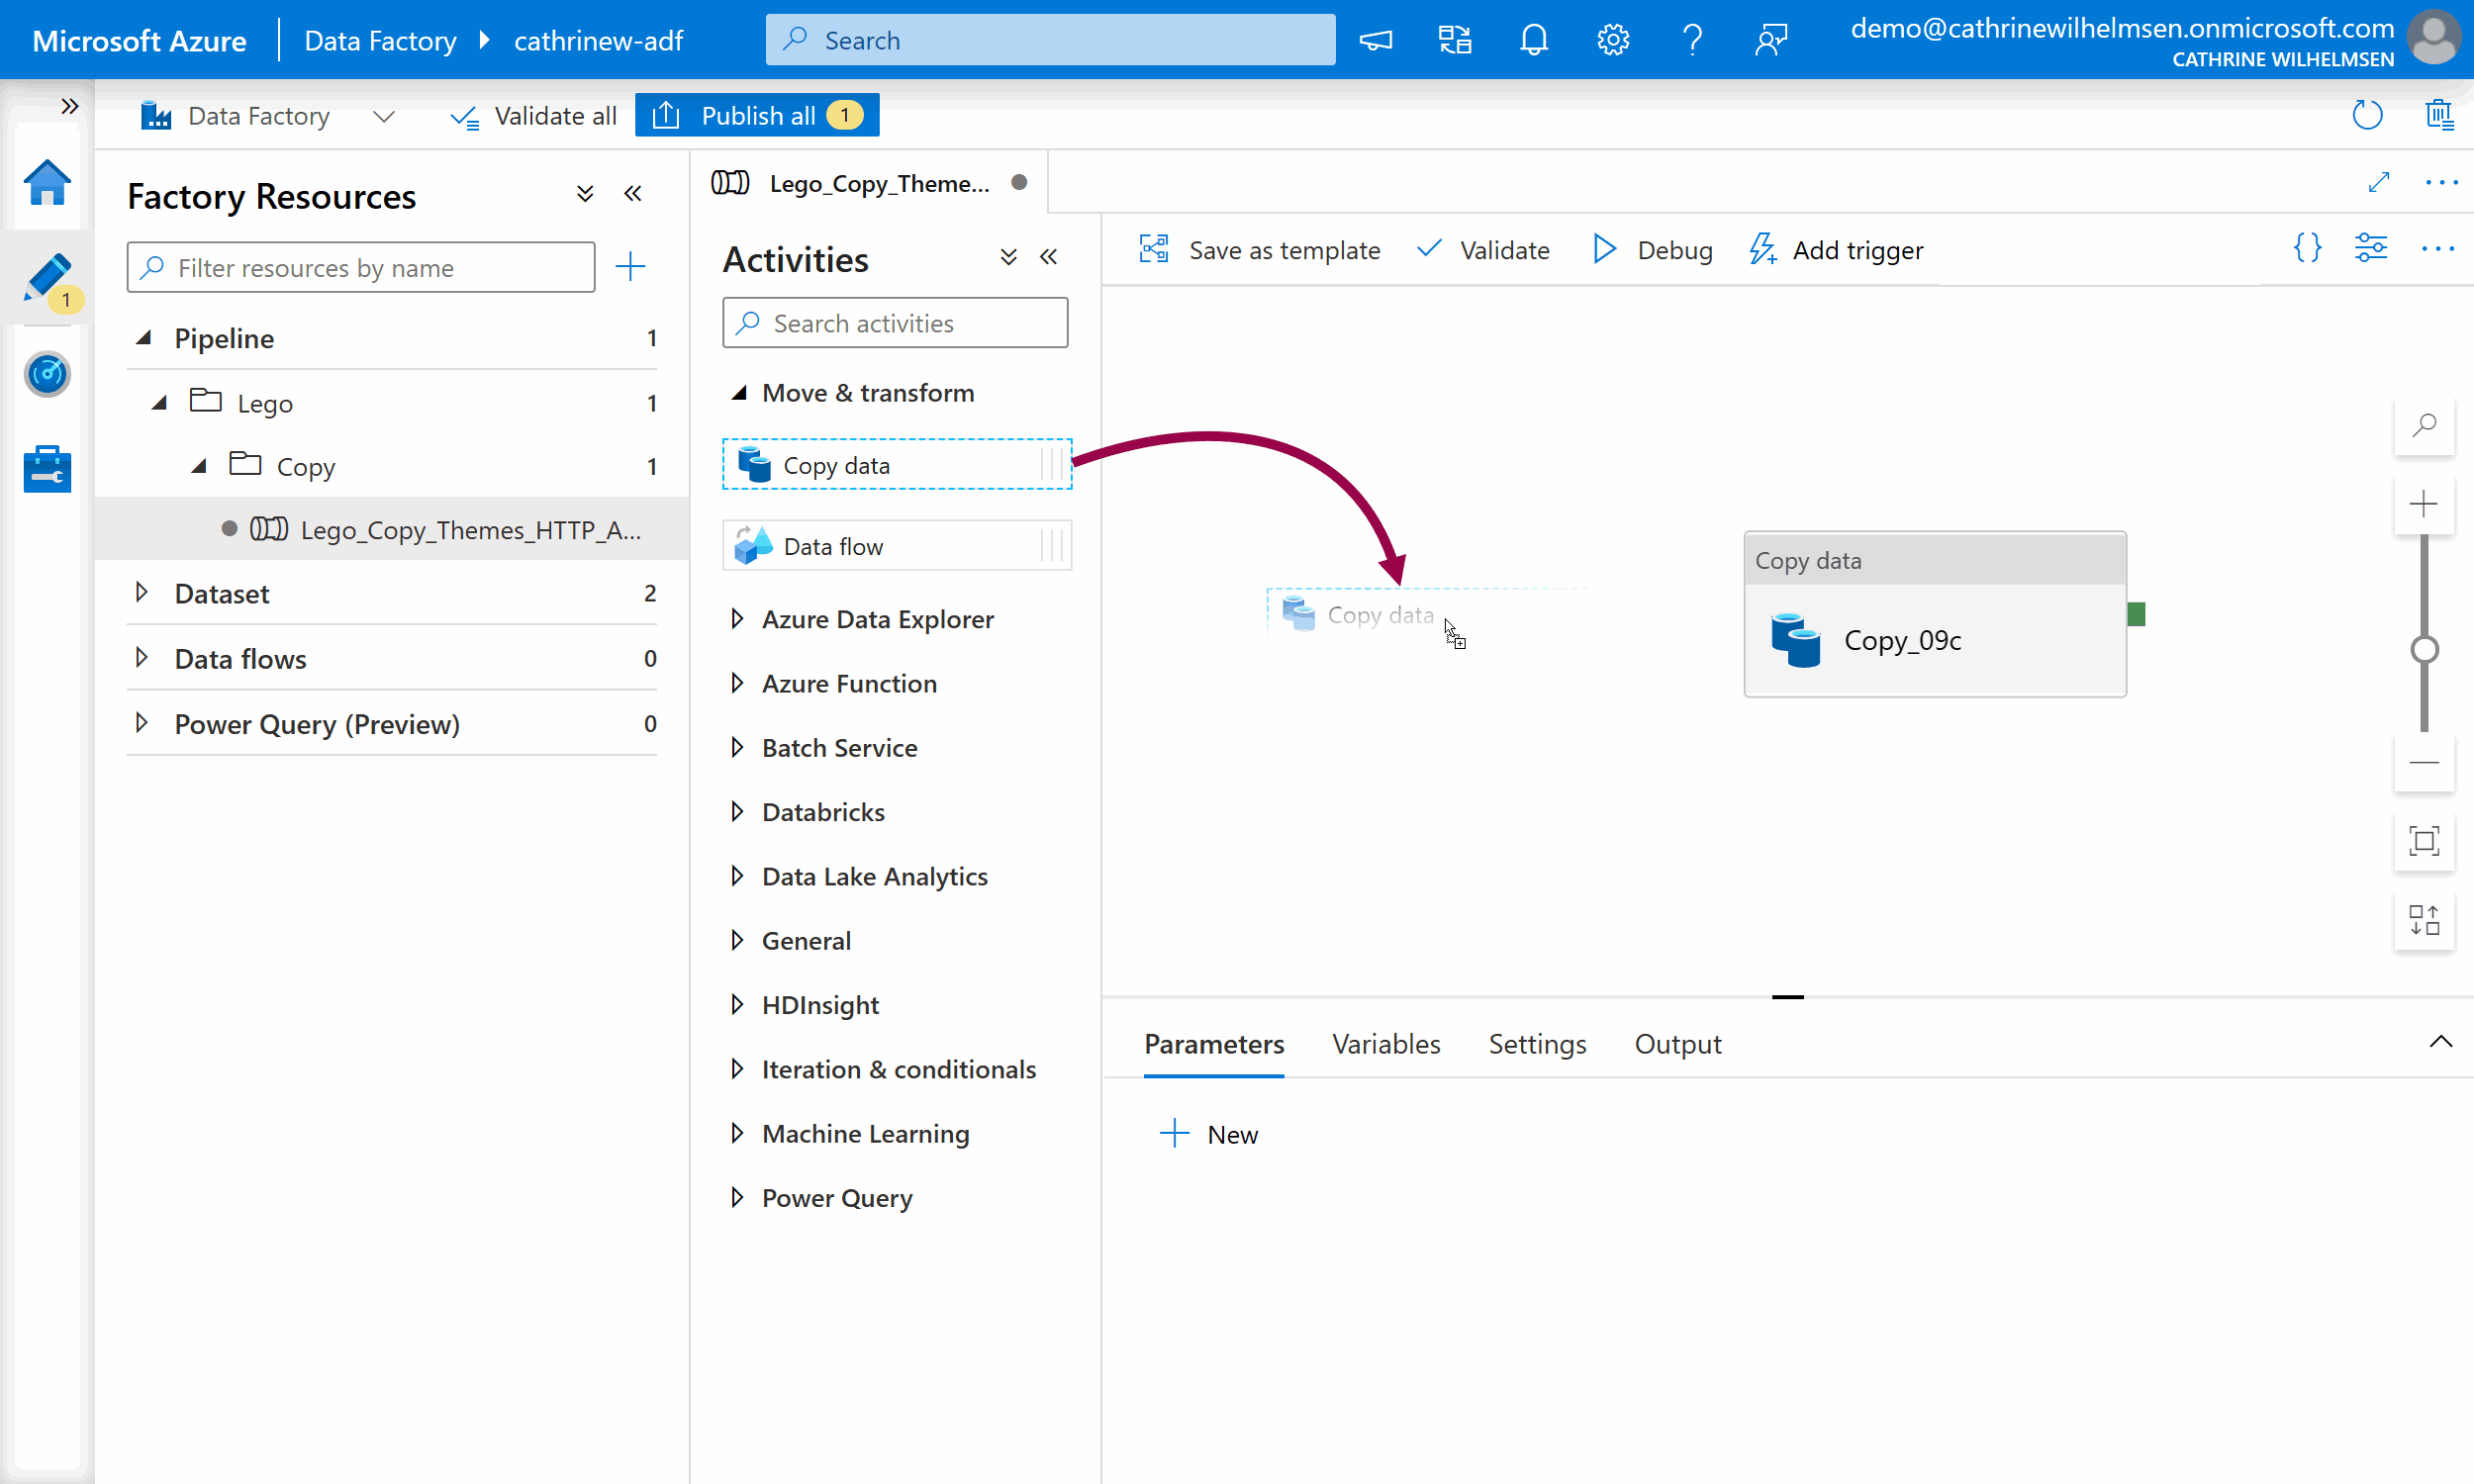 Screenshot of the Azure Data Factory interface, showing how to drag an activity onto the design canvas.